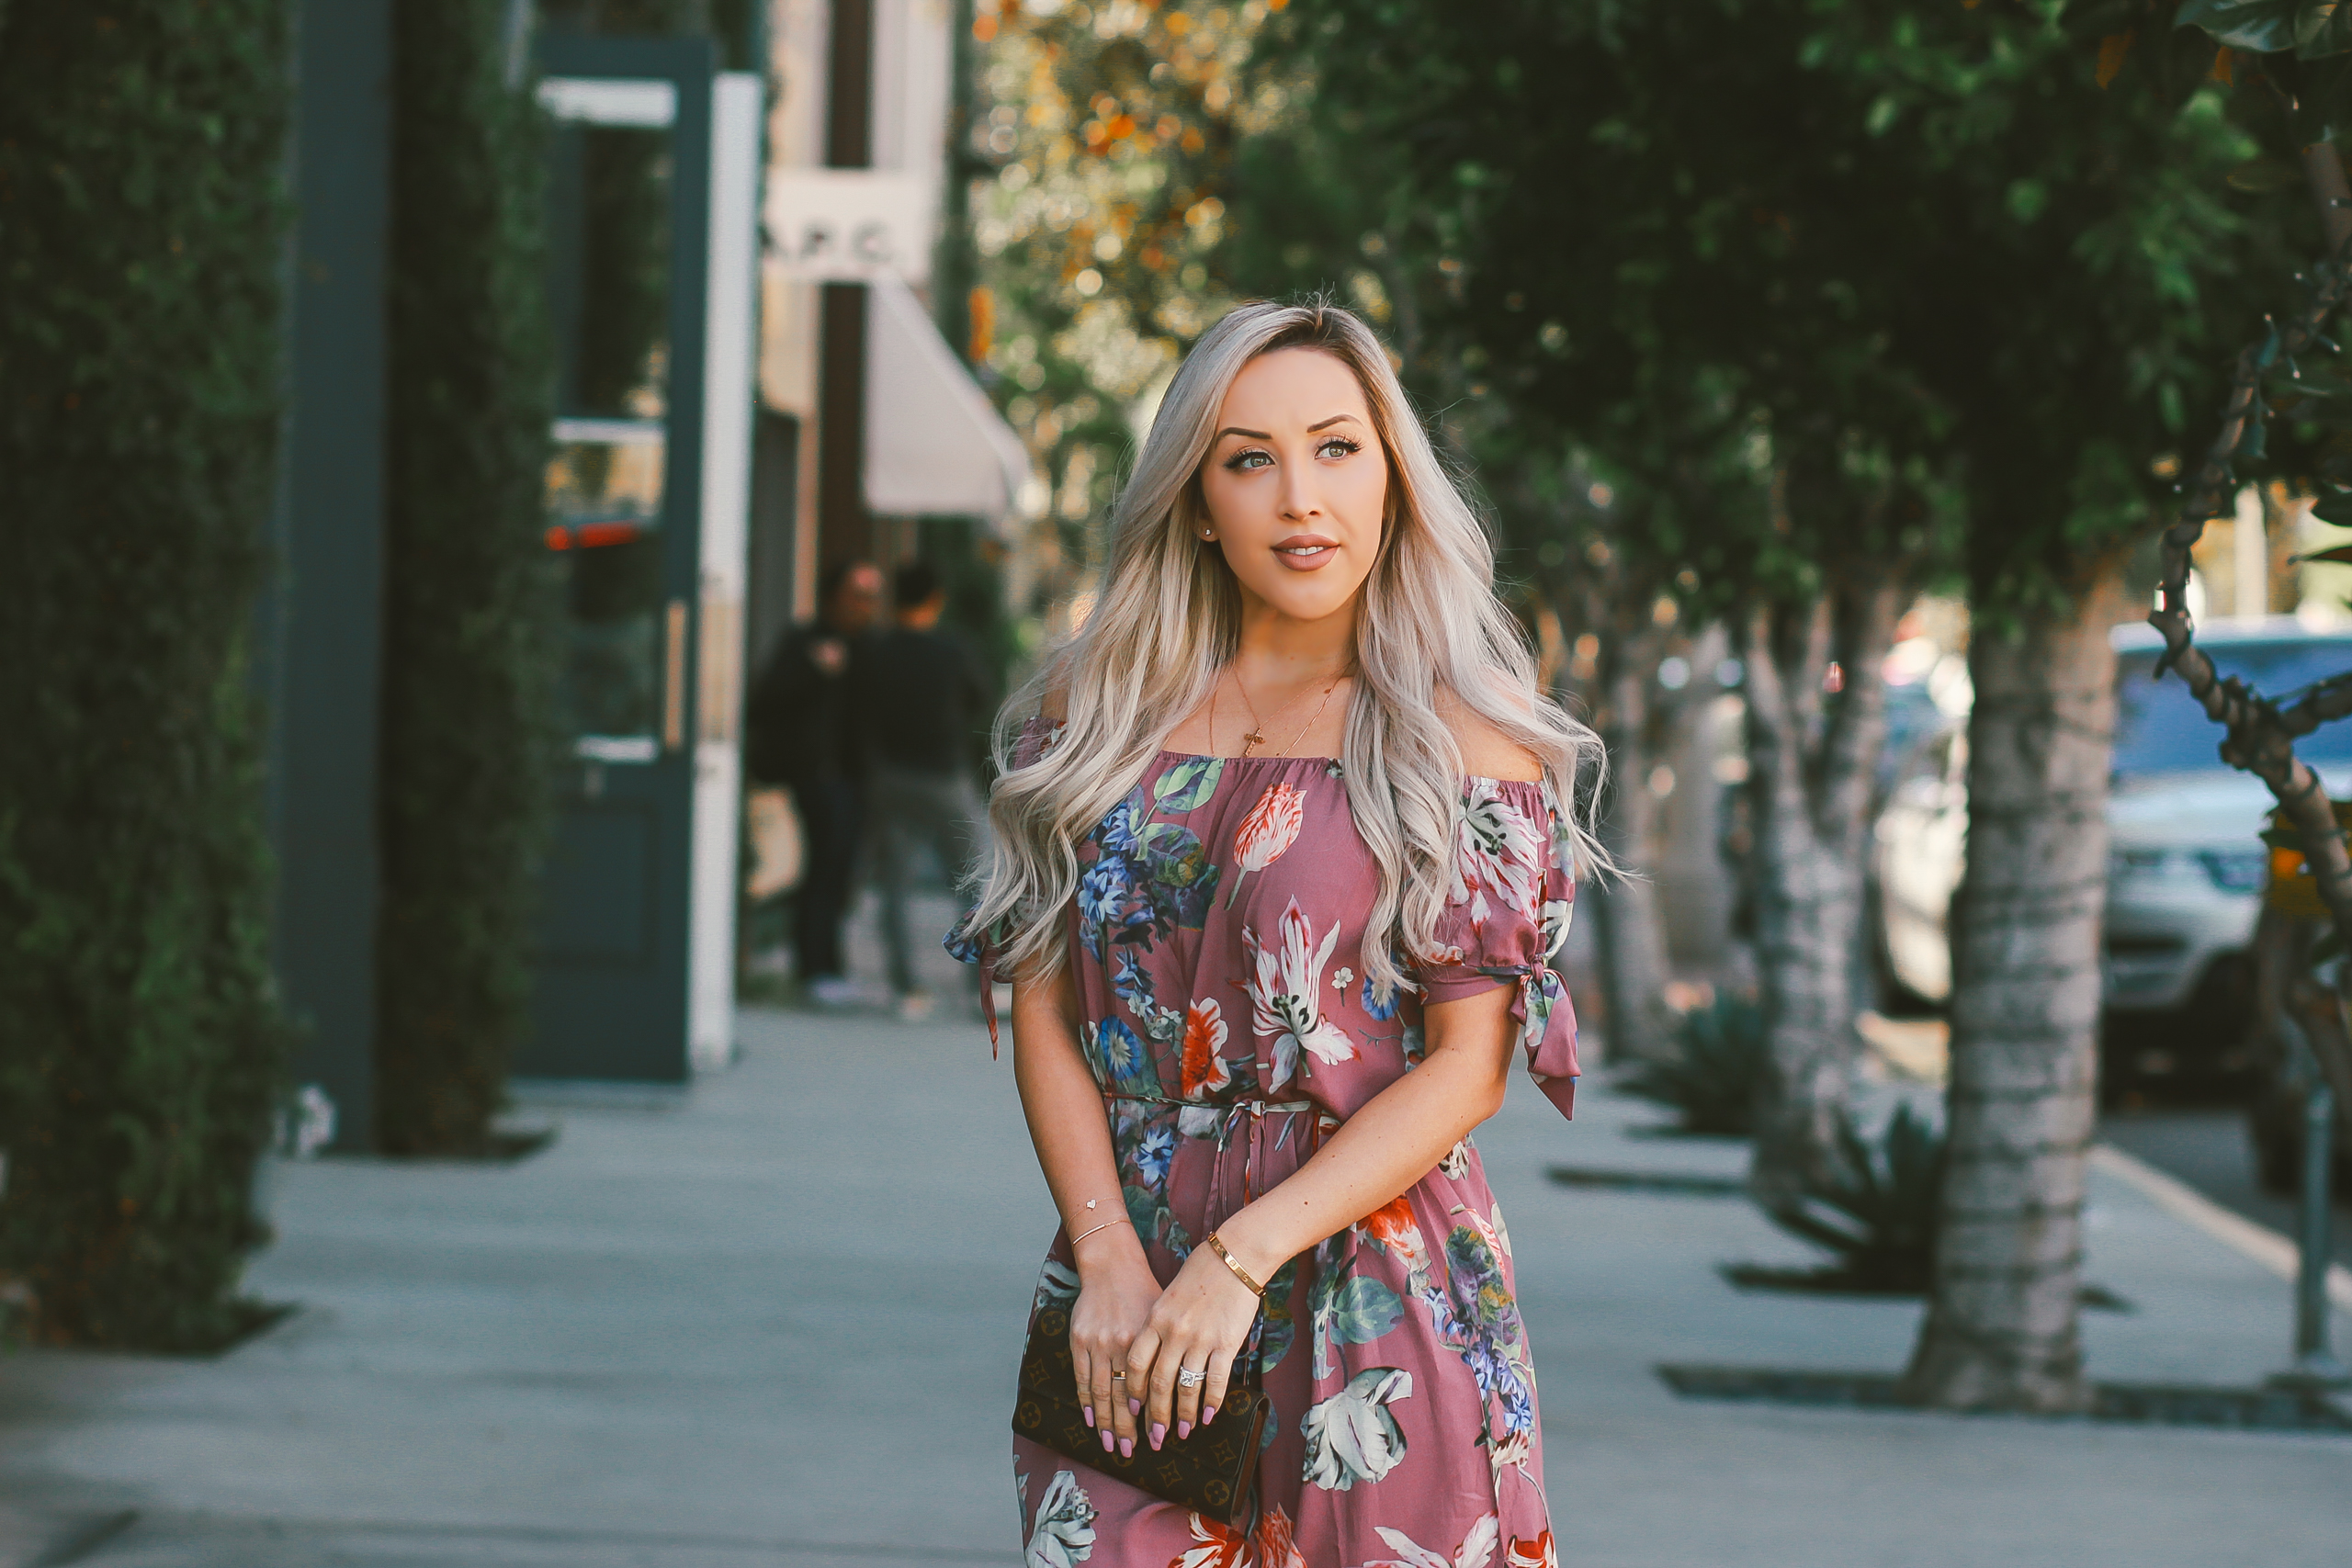 A Plum Floral Dress from @plumprettysugar | Spring Style | Blondie in the City by Hayley Larue